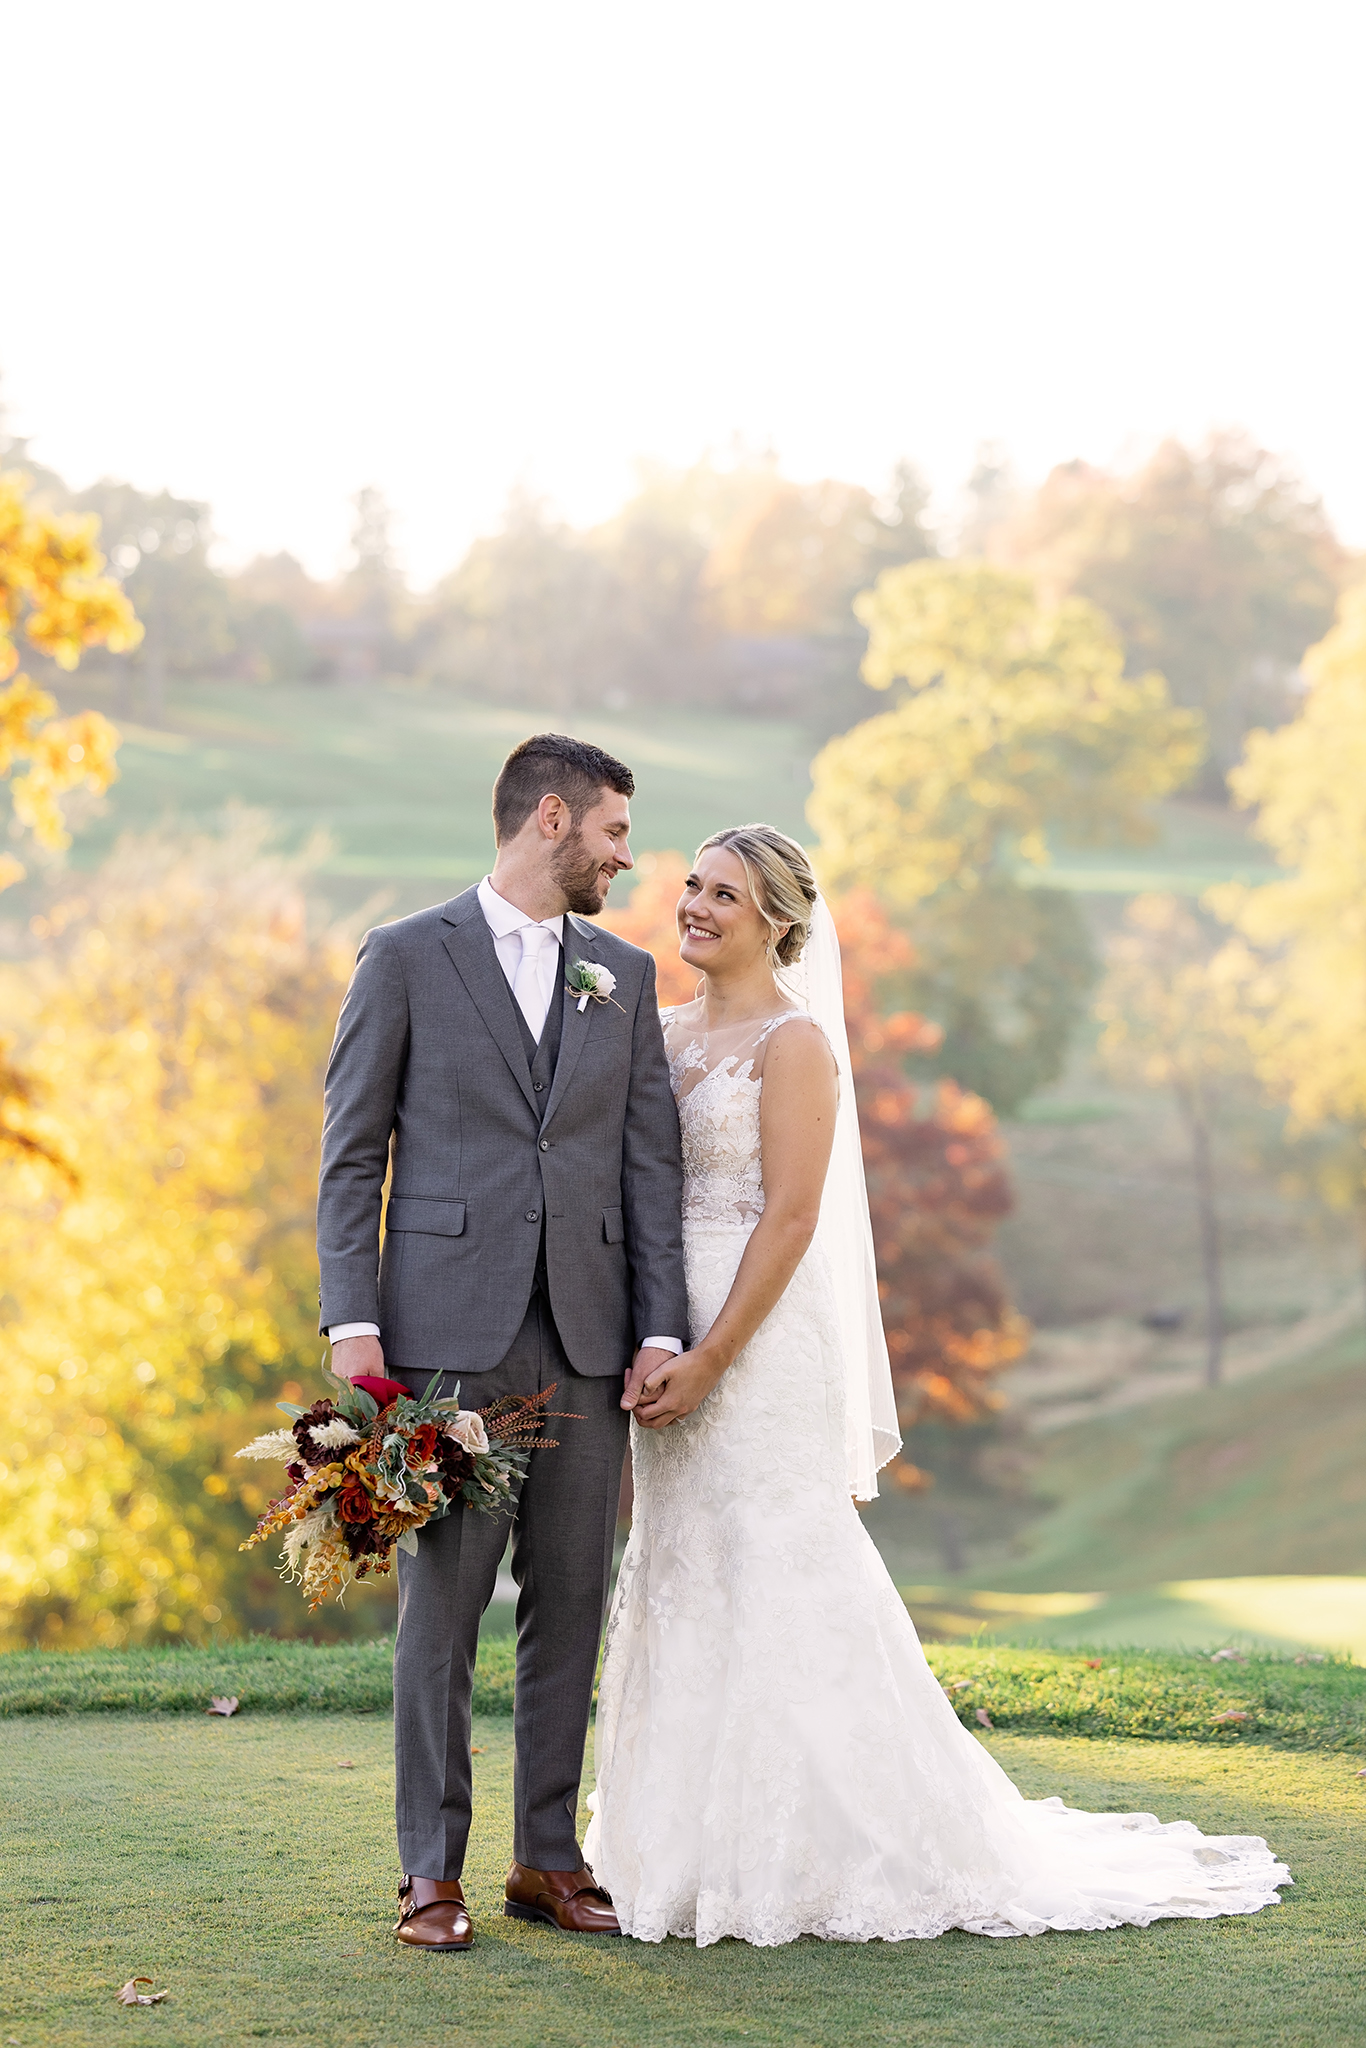 Montour Heights Country Club Wedding in Pittsburgh, PA Photographed by Pittsburgh Wedding Photographer Acevedo Weddings